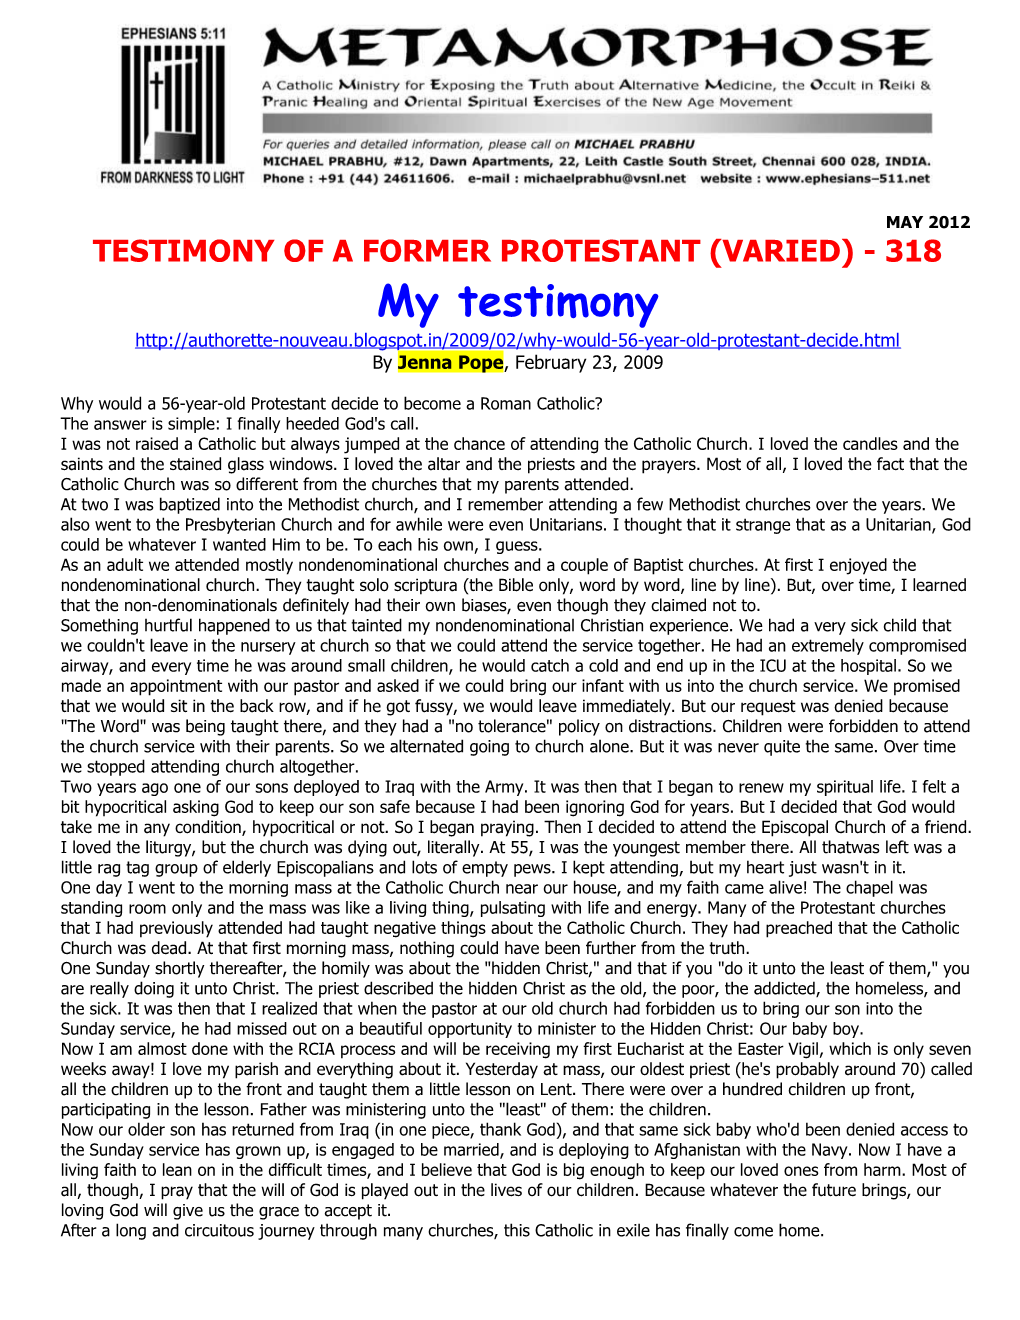 Testimony of a Former Protestant (Varied) - 318